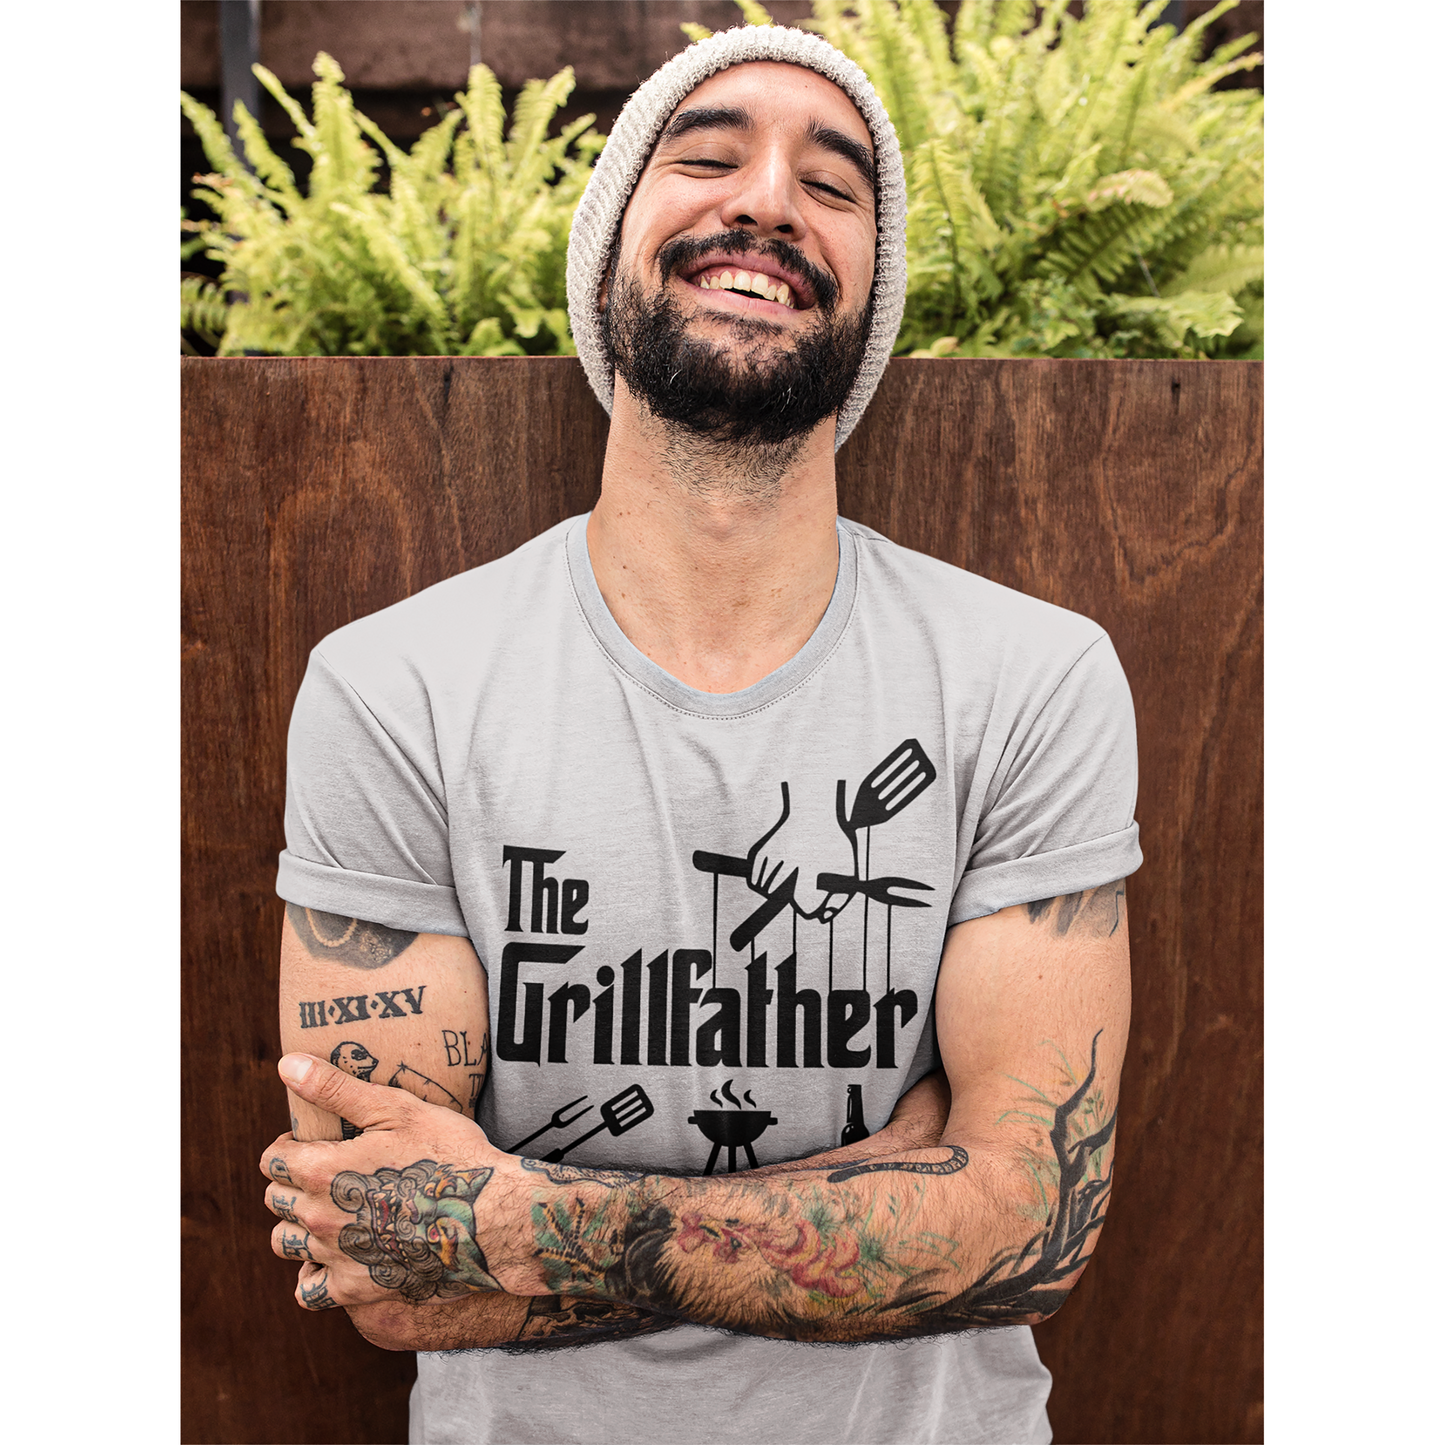 The Grillfather Unisex T-shirt